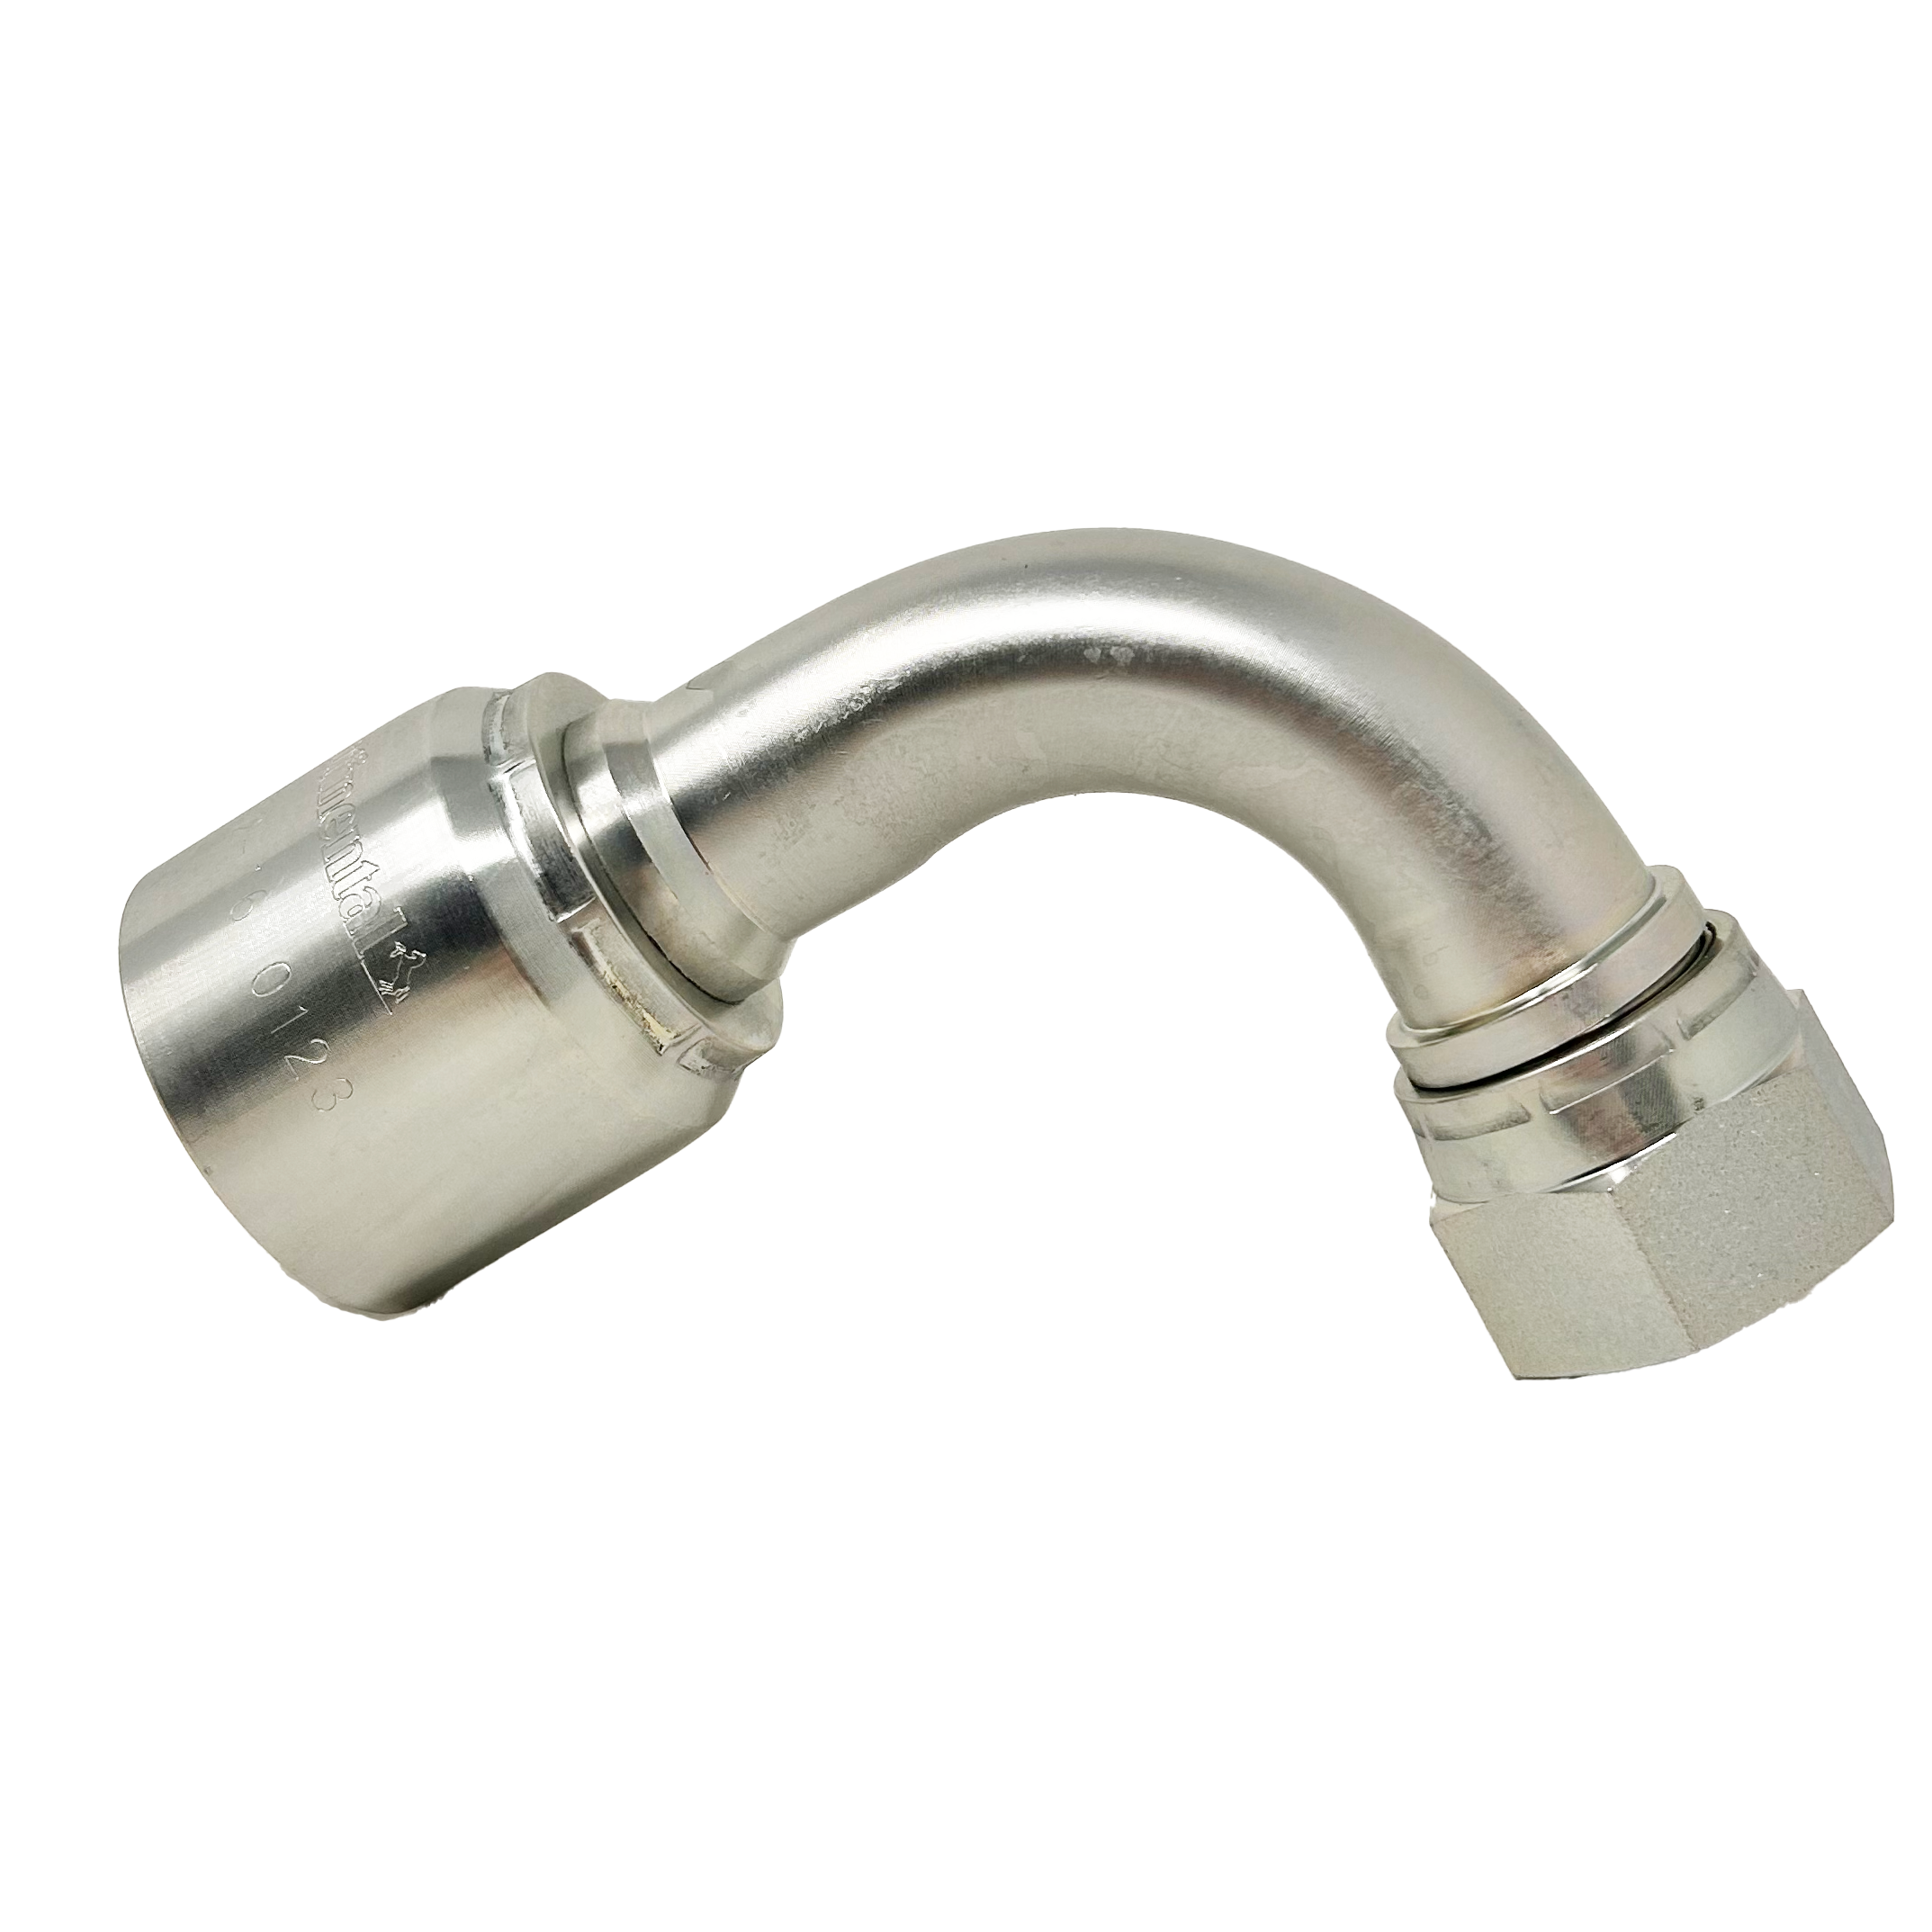 B2-JCFX90-0404S: Continental Hose Fitting, 0.25 (1/4") Hose ID x 7/16-20 Female JIC, 90-Degree Swivel Connection